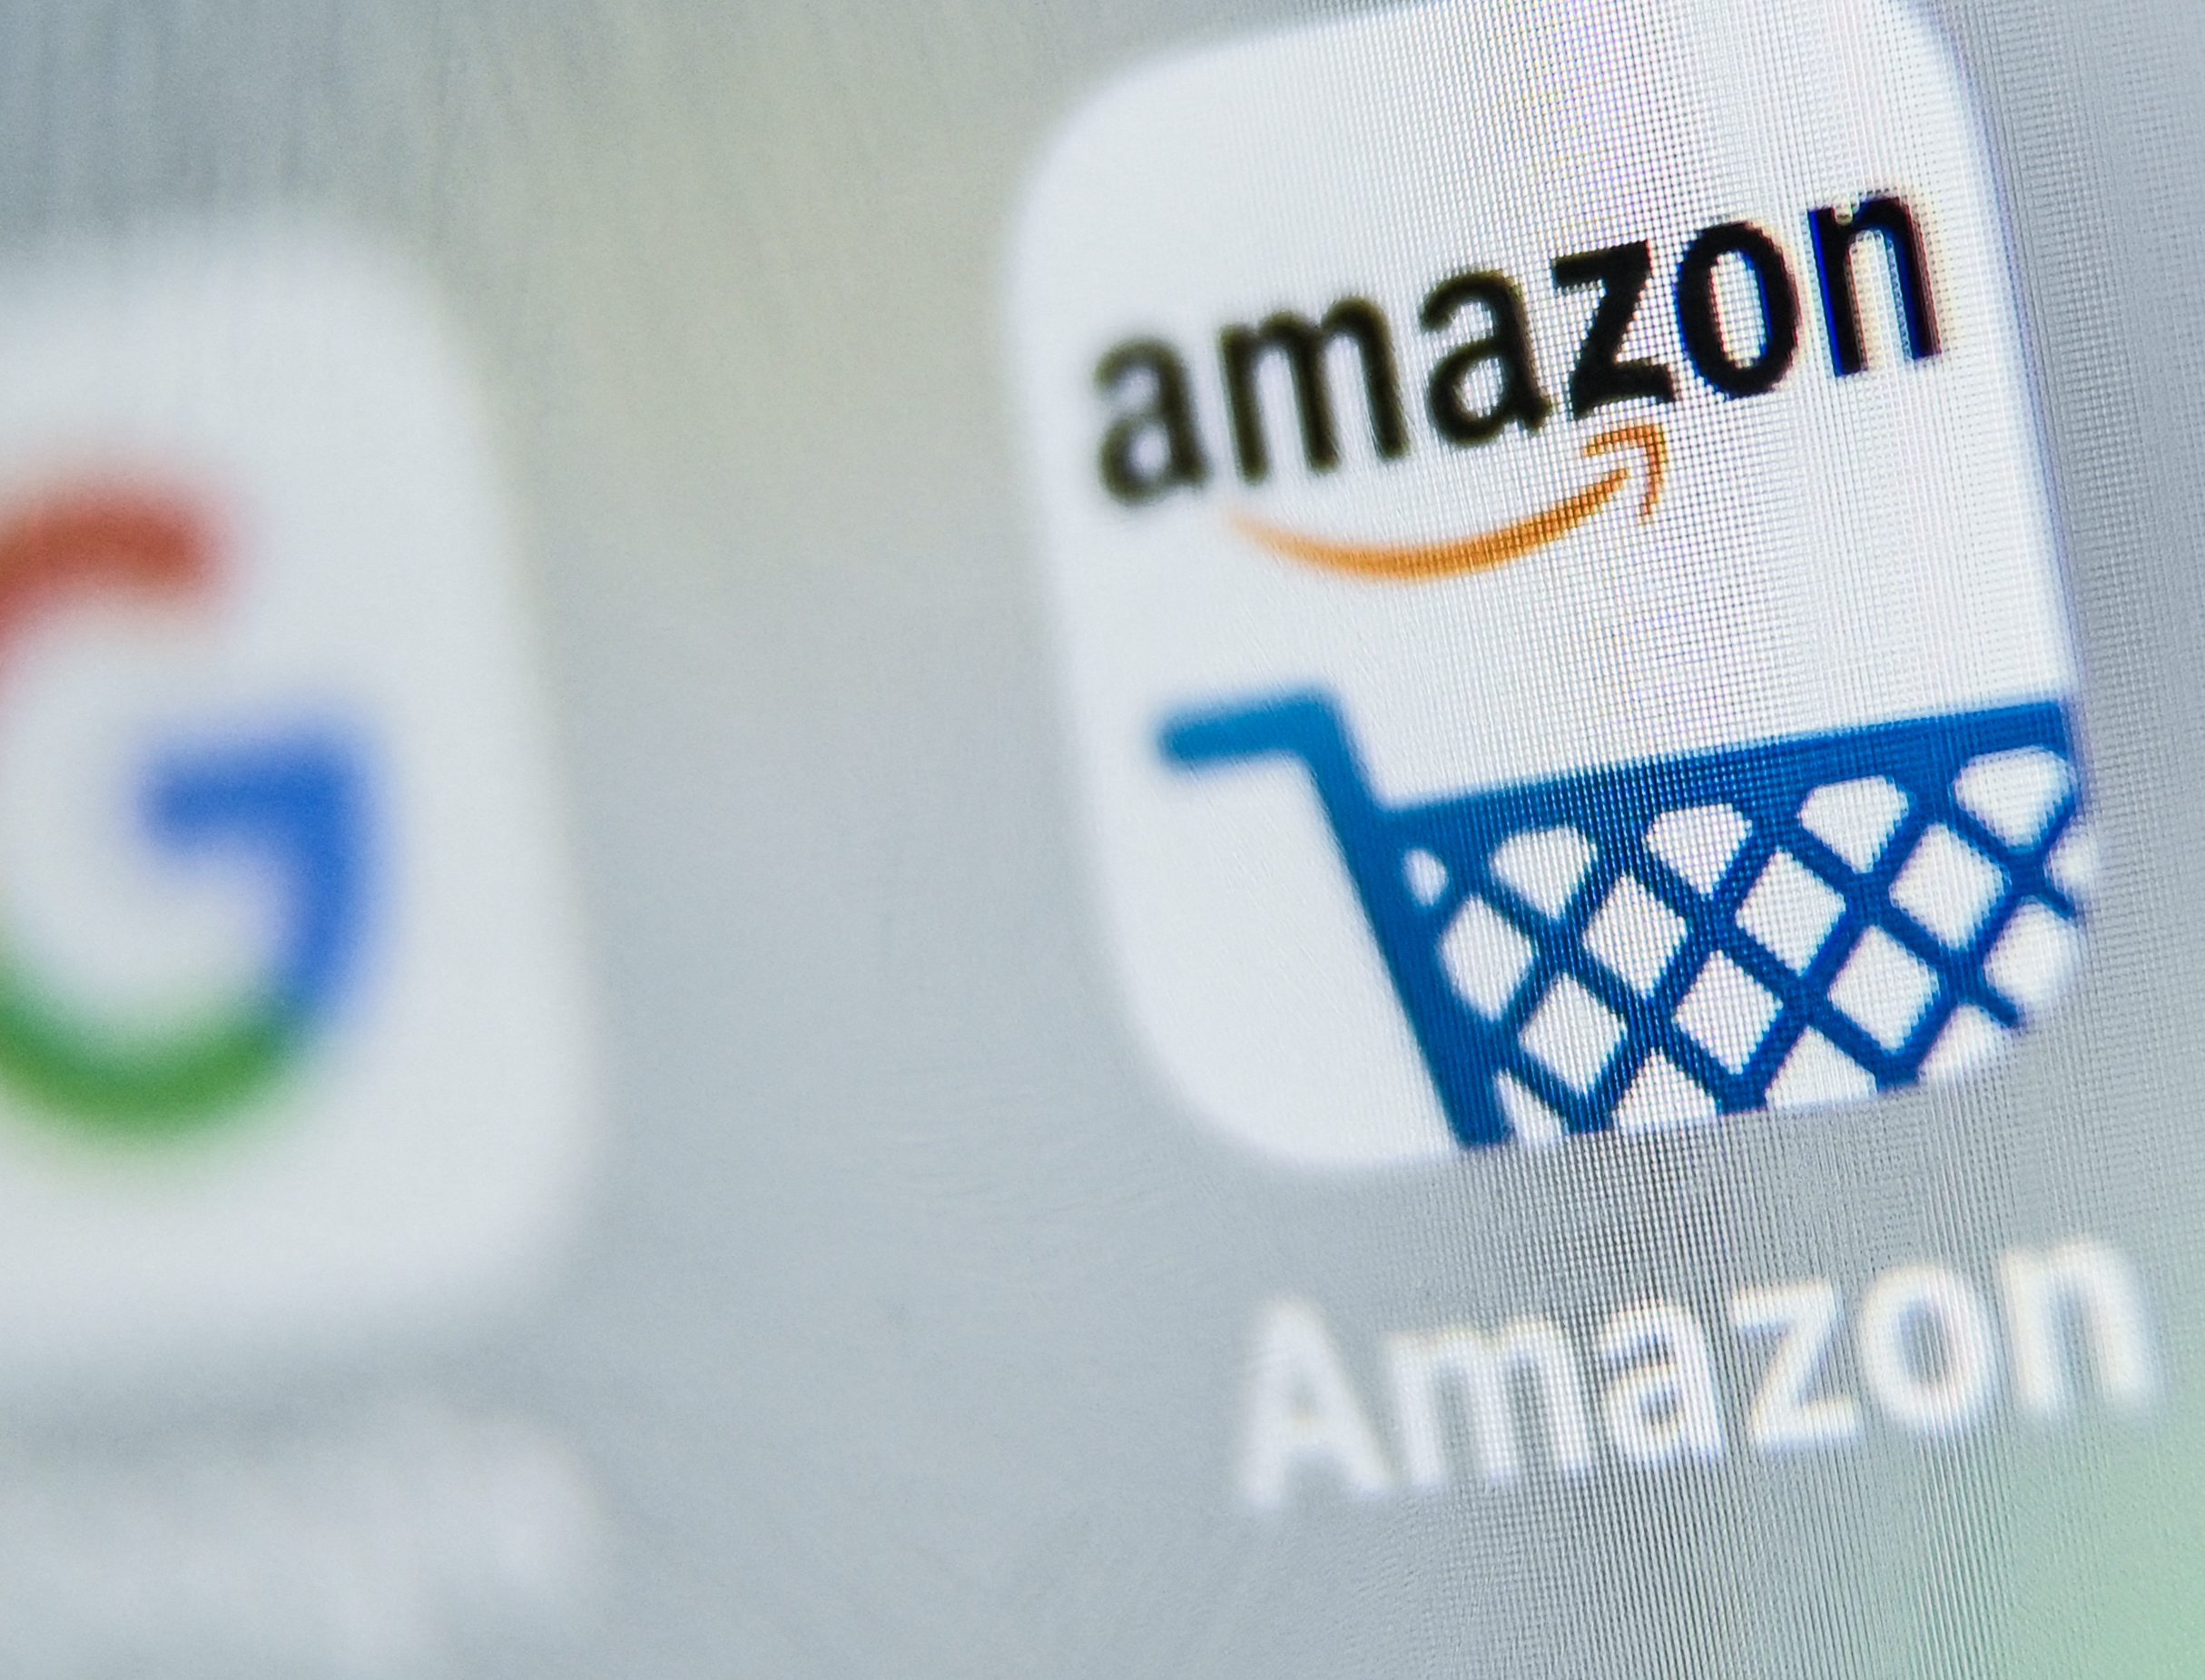 Amazon and Google were previously called upon by employees to terminate any of their contracts with the Israeli military.